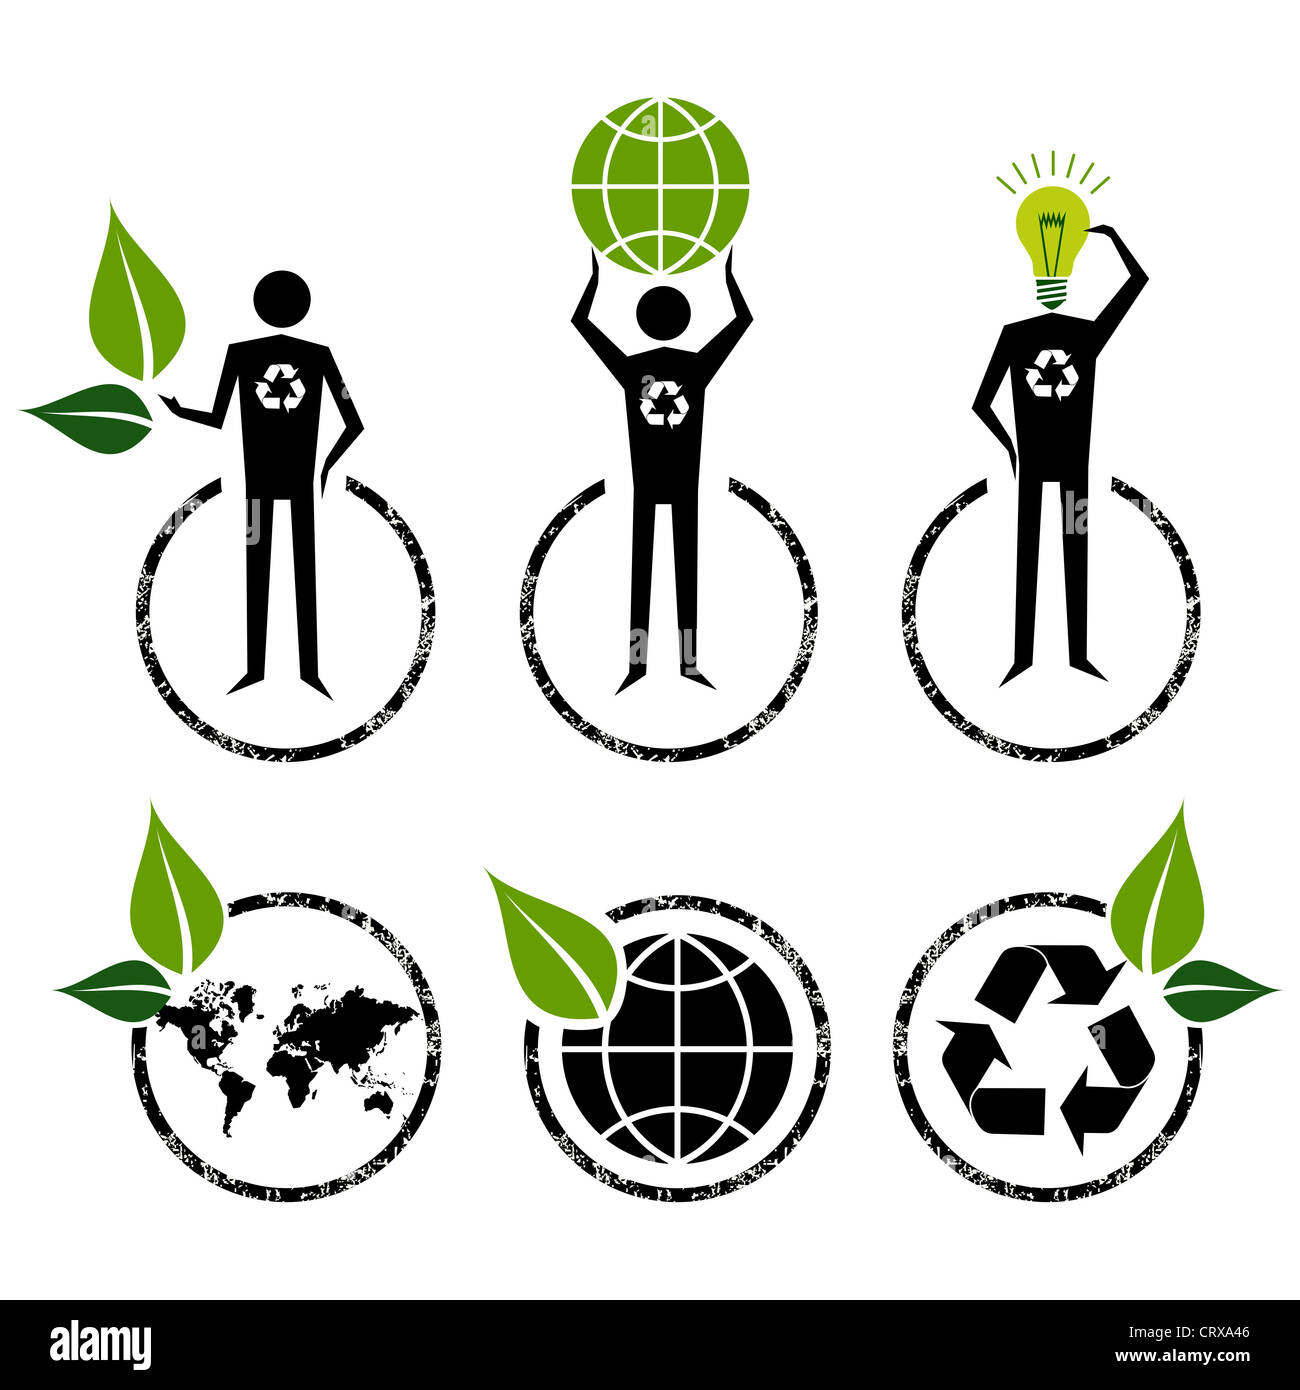 Go Green people symbol ideas. Vector file layered for easy manipulation and custom coloring. Stock Photo